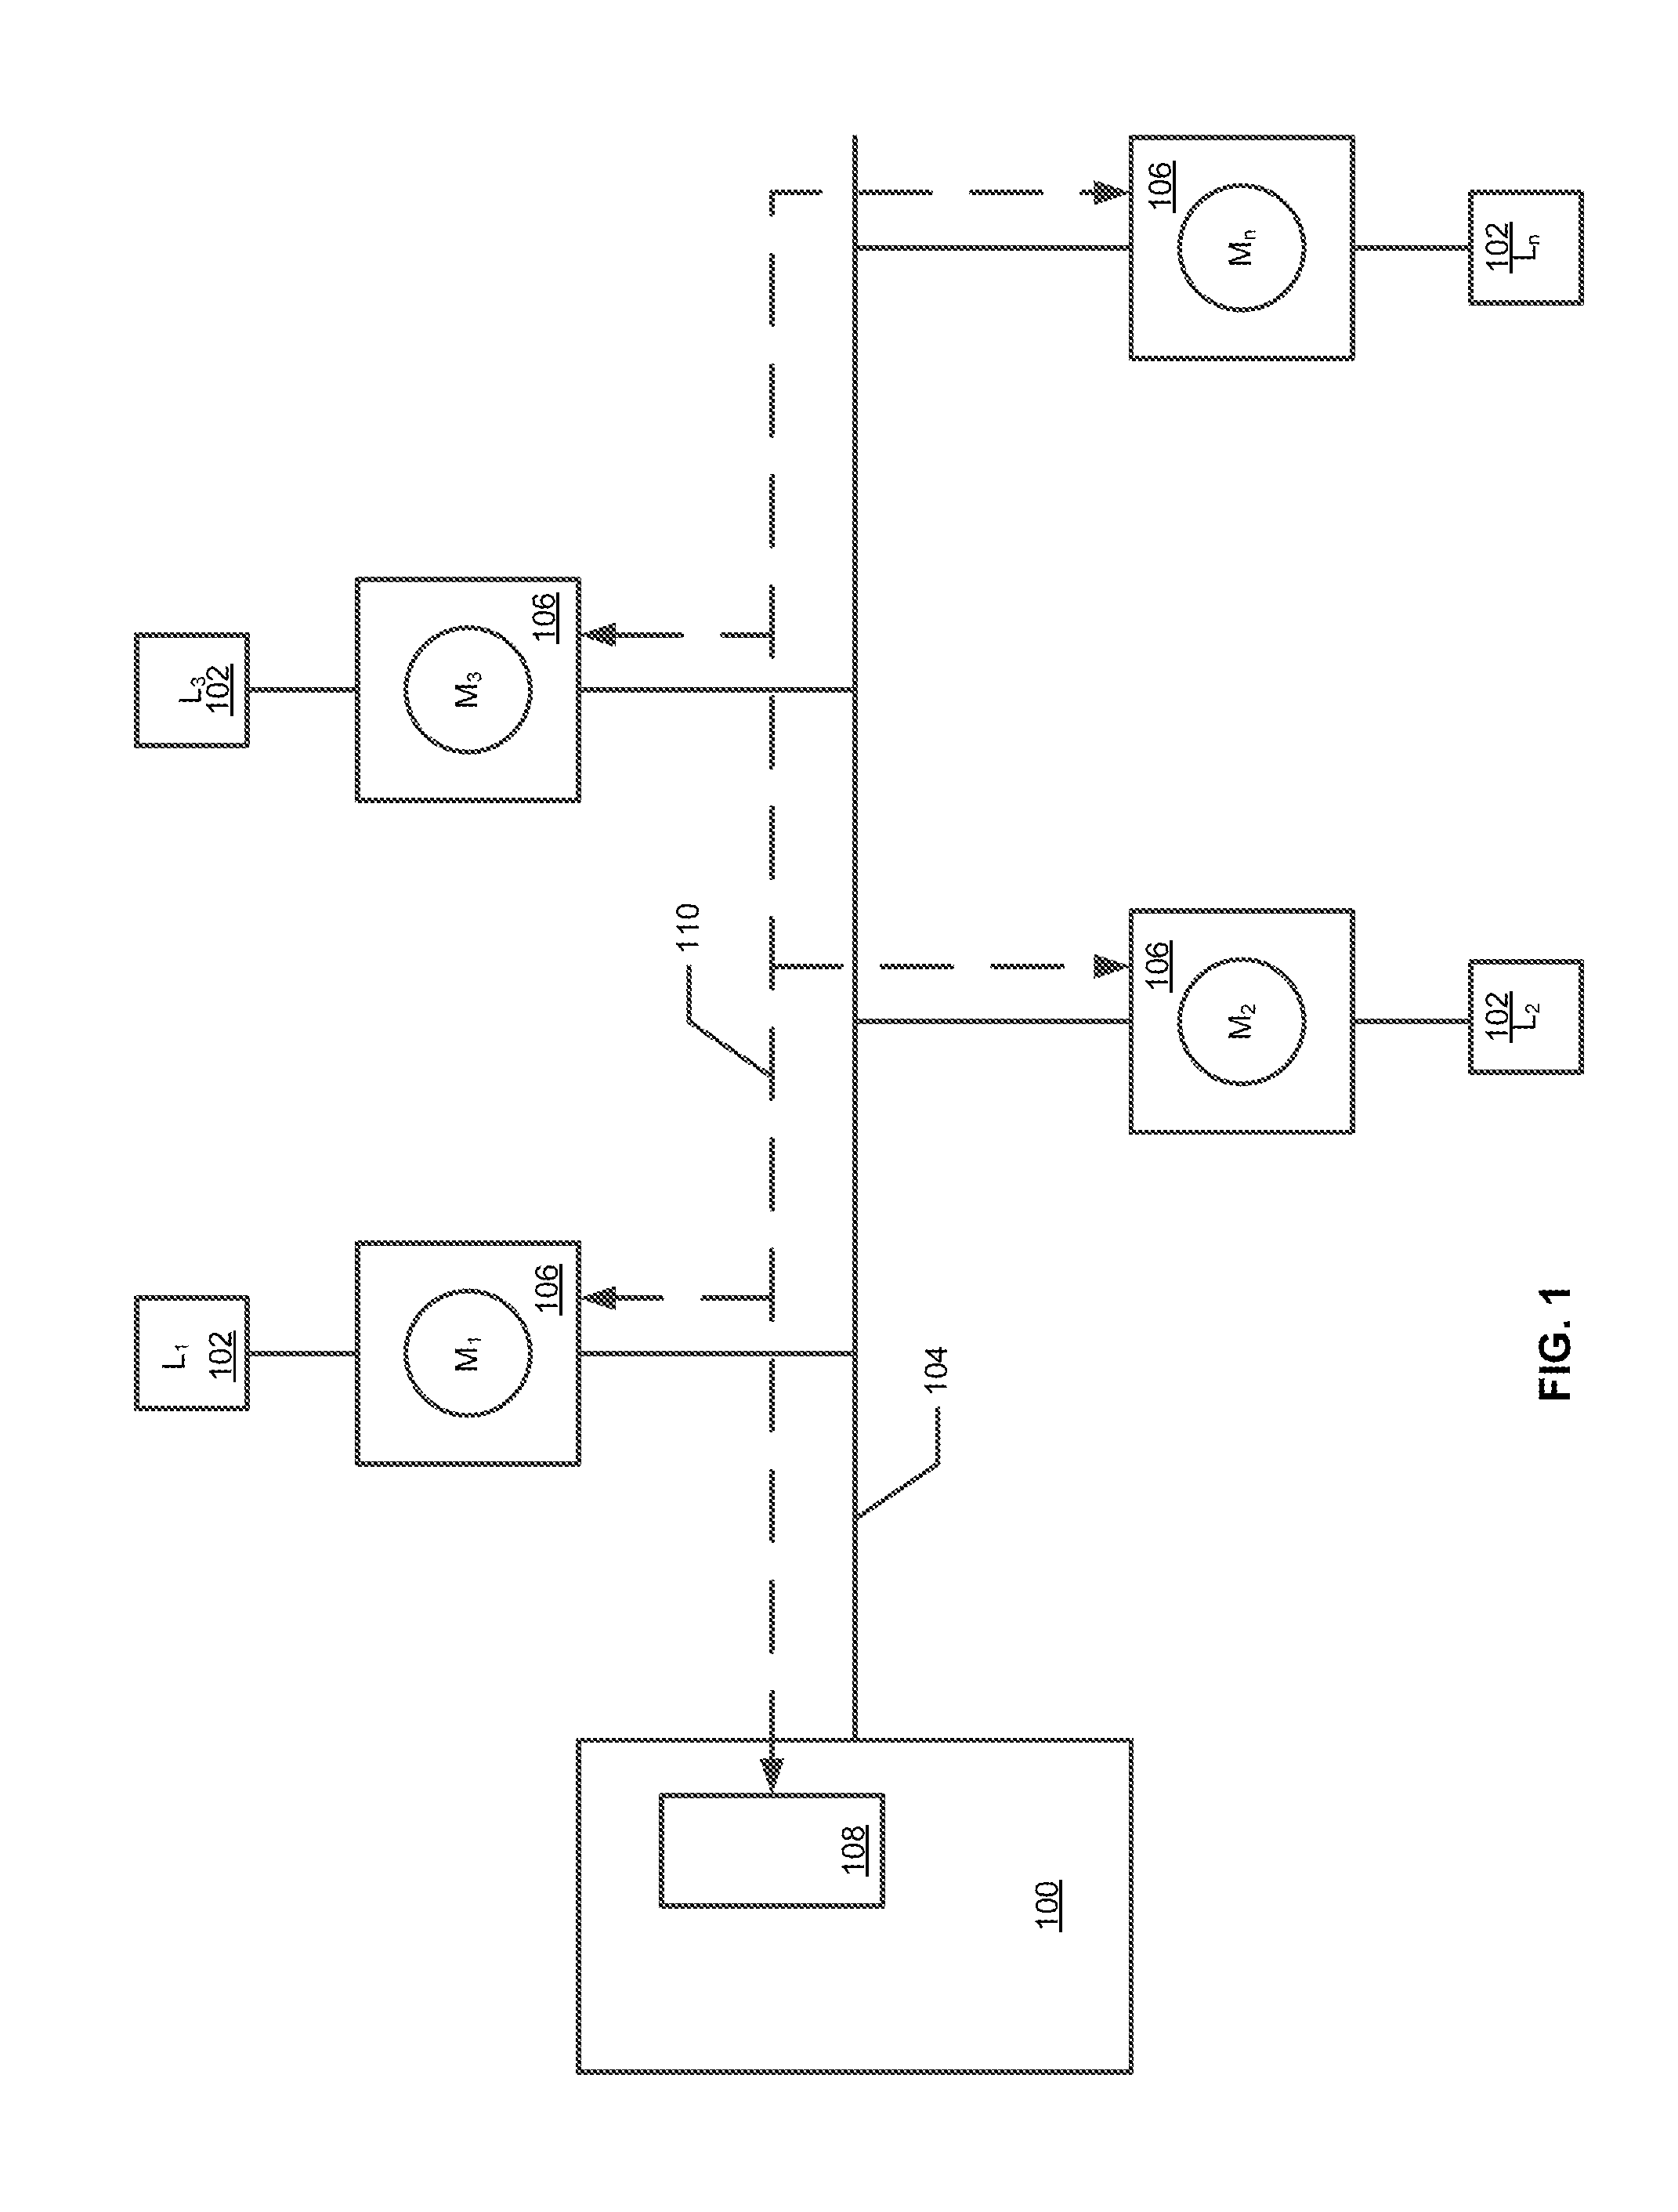 Method and system to disconnect a utility service based on seismic activity